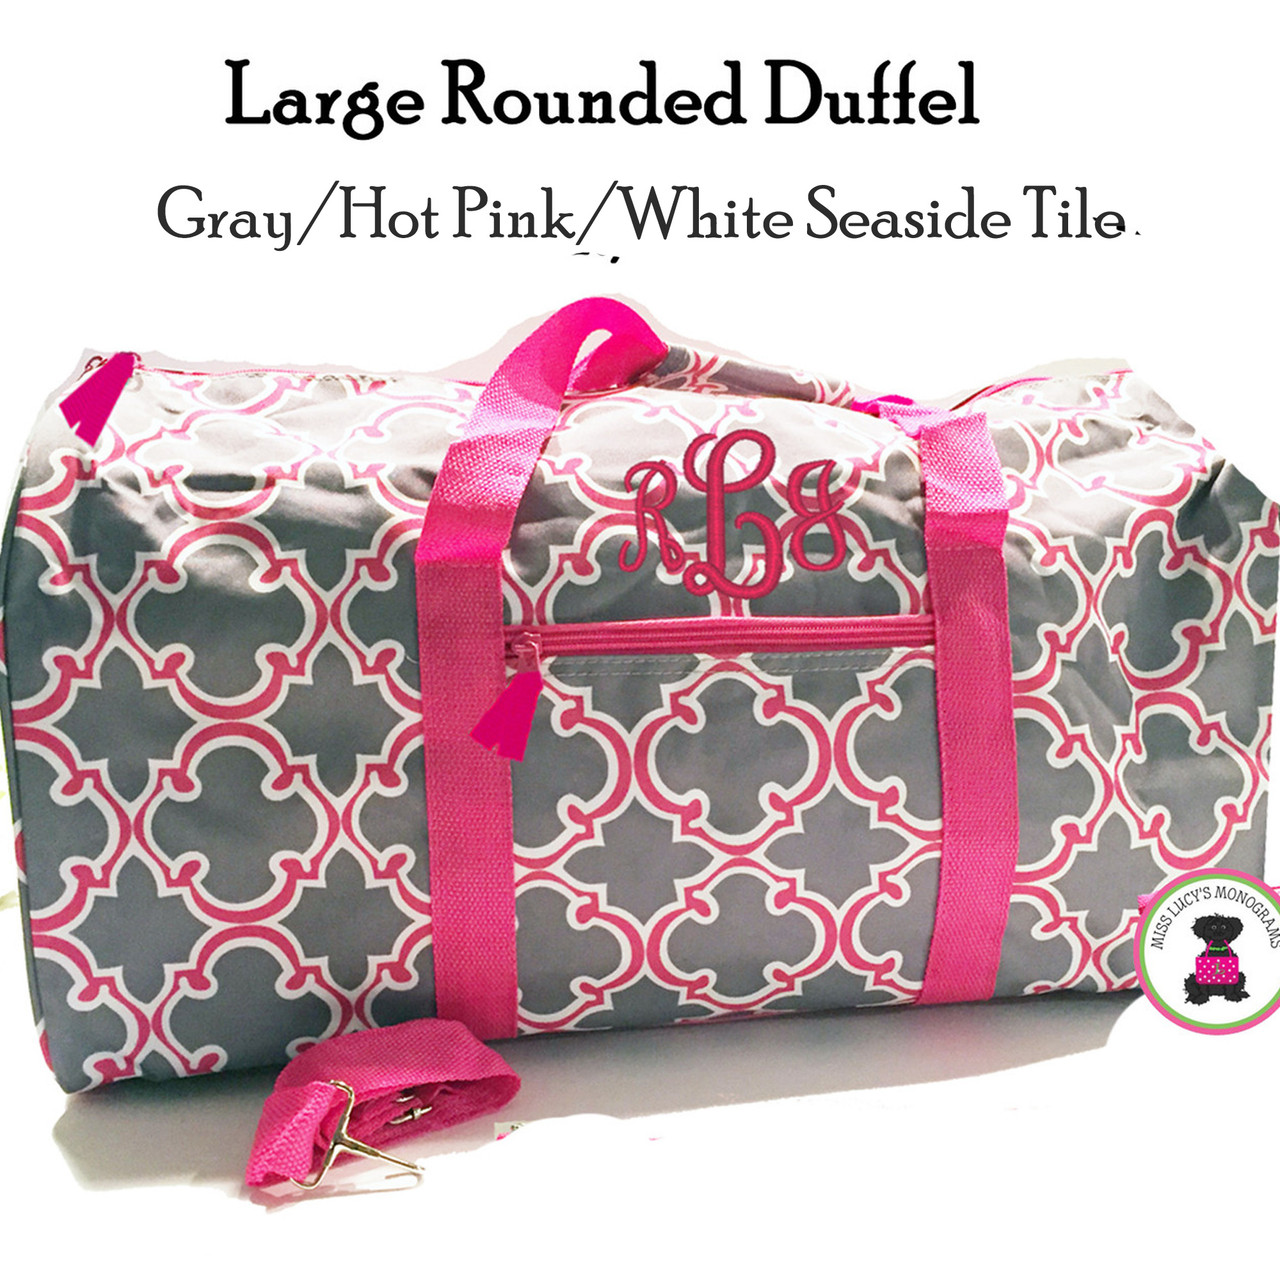 FOR HER Monogrammed Large Canvas Rounded Duffle -Gray/Hot Pink/White  Seaside Tile- FREE SHIP/Tween Gift/Grad Gift/ Travel Set/Gift for Her/Dance